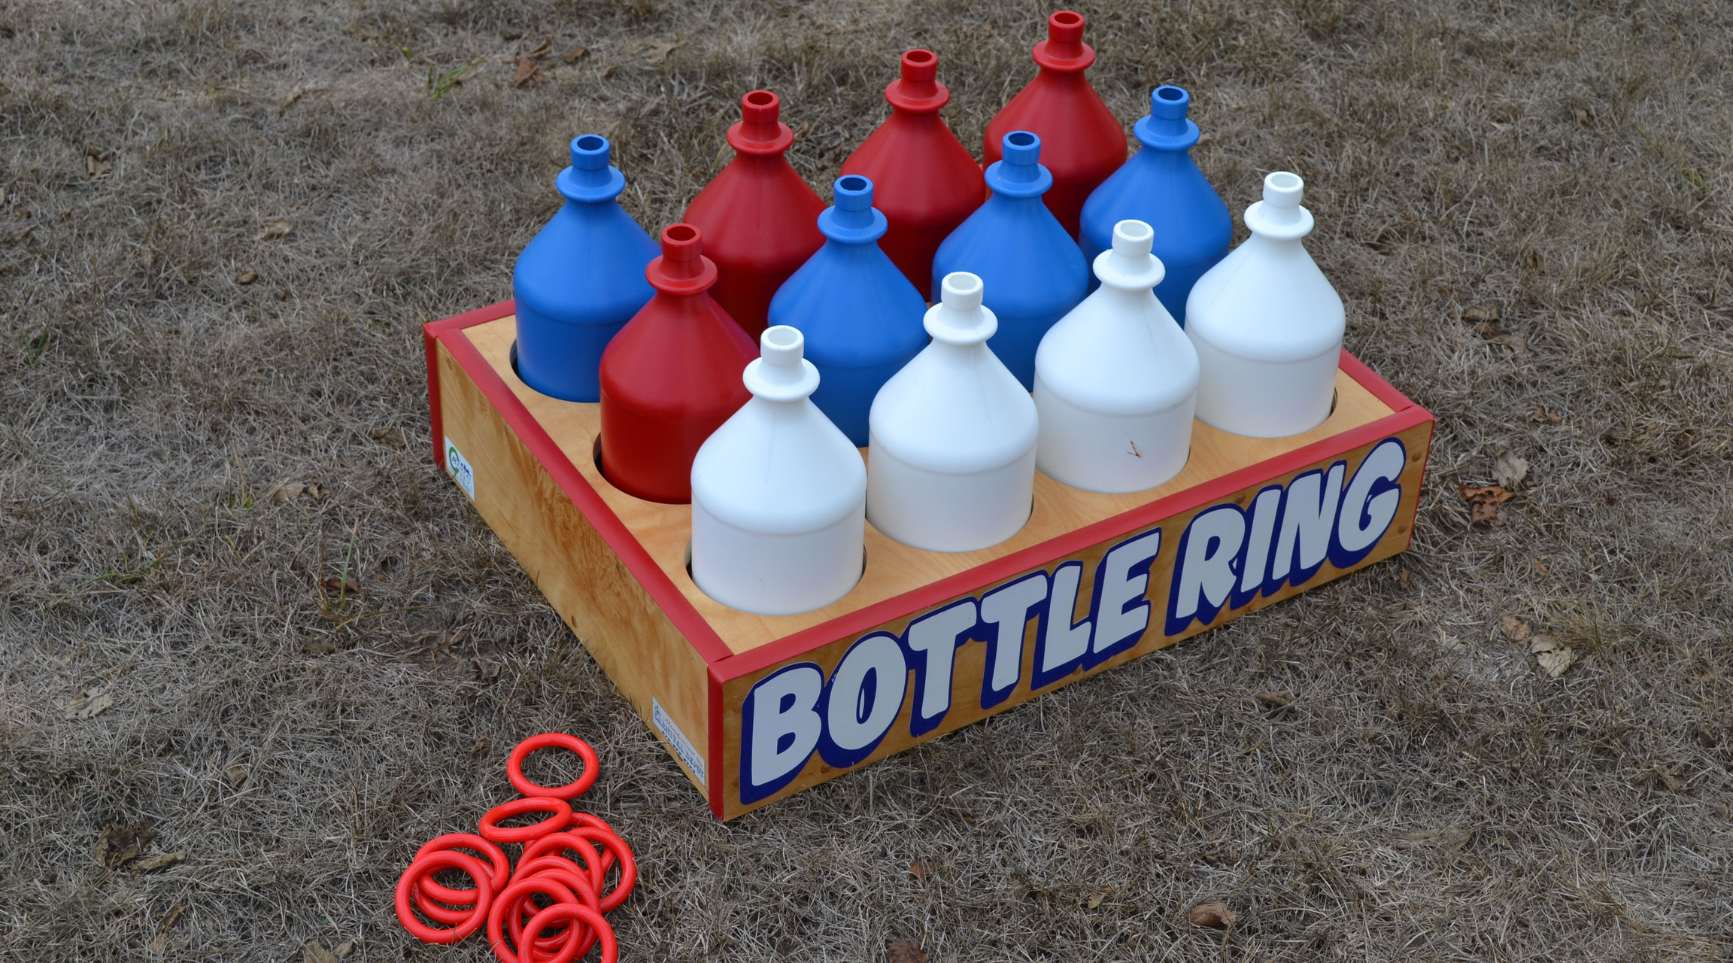 How To Make A Ring Toss Game With Bottles